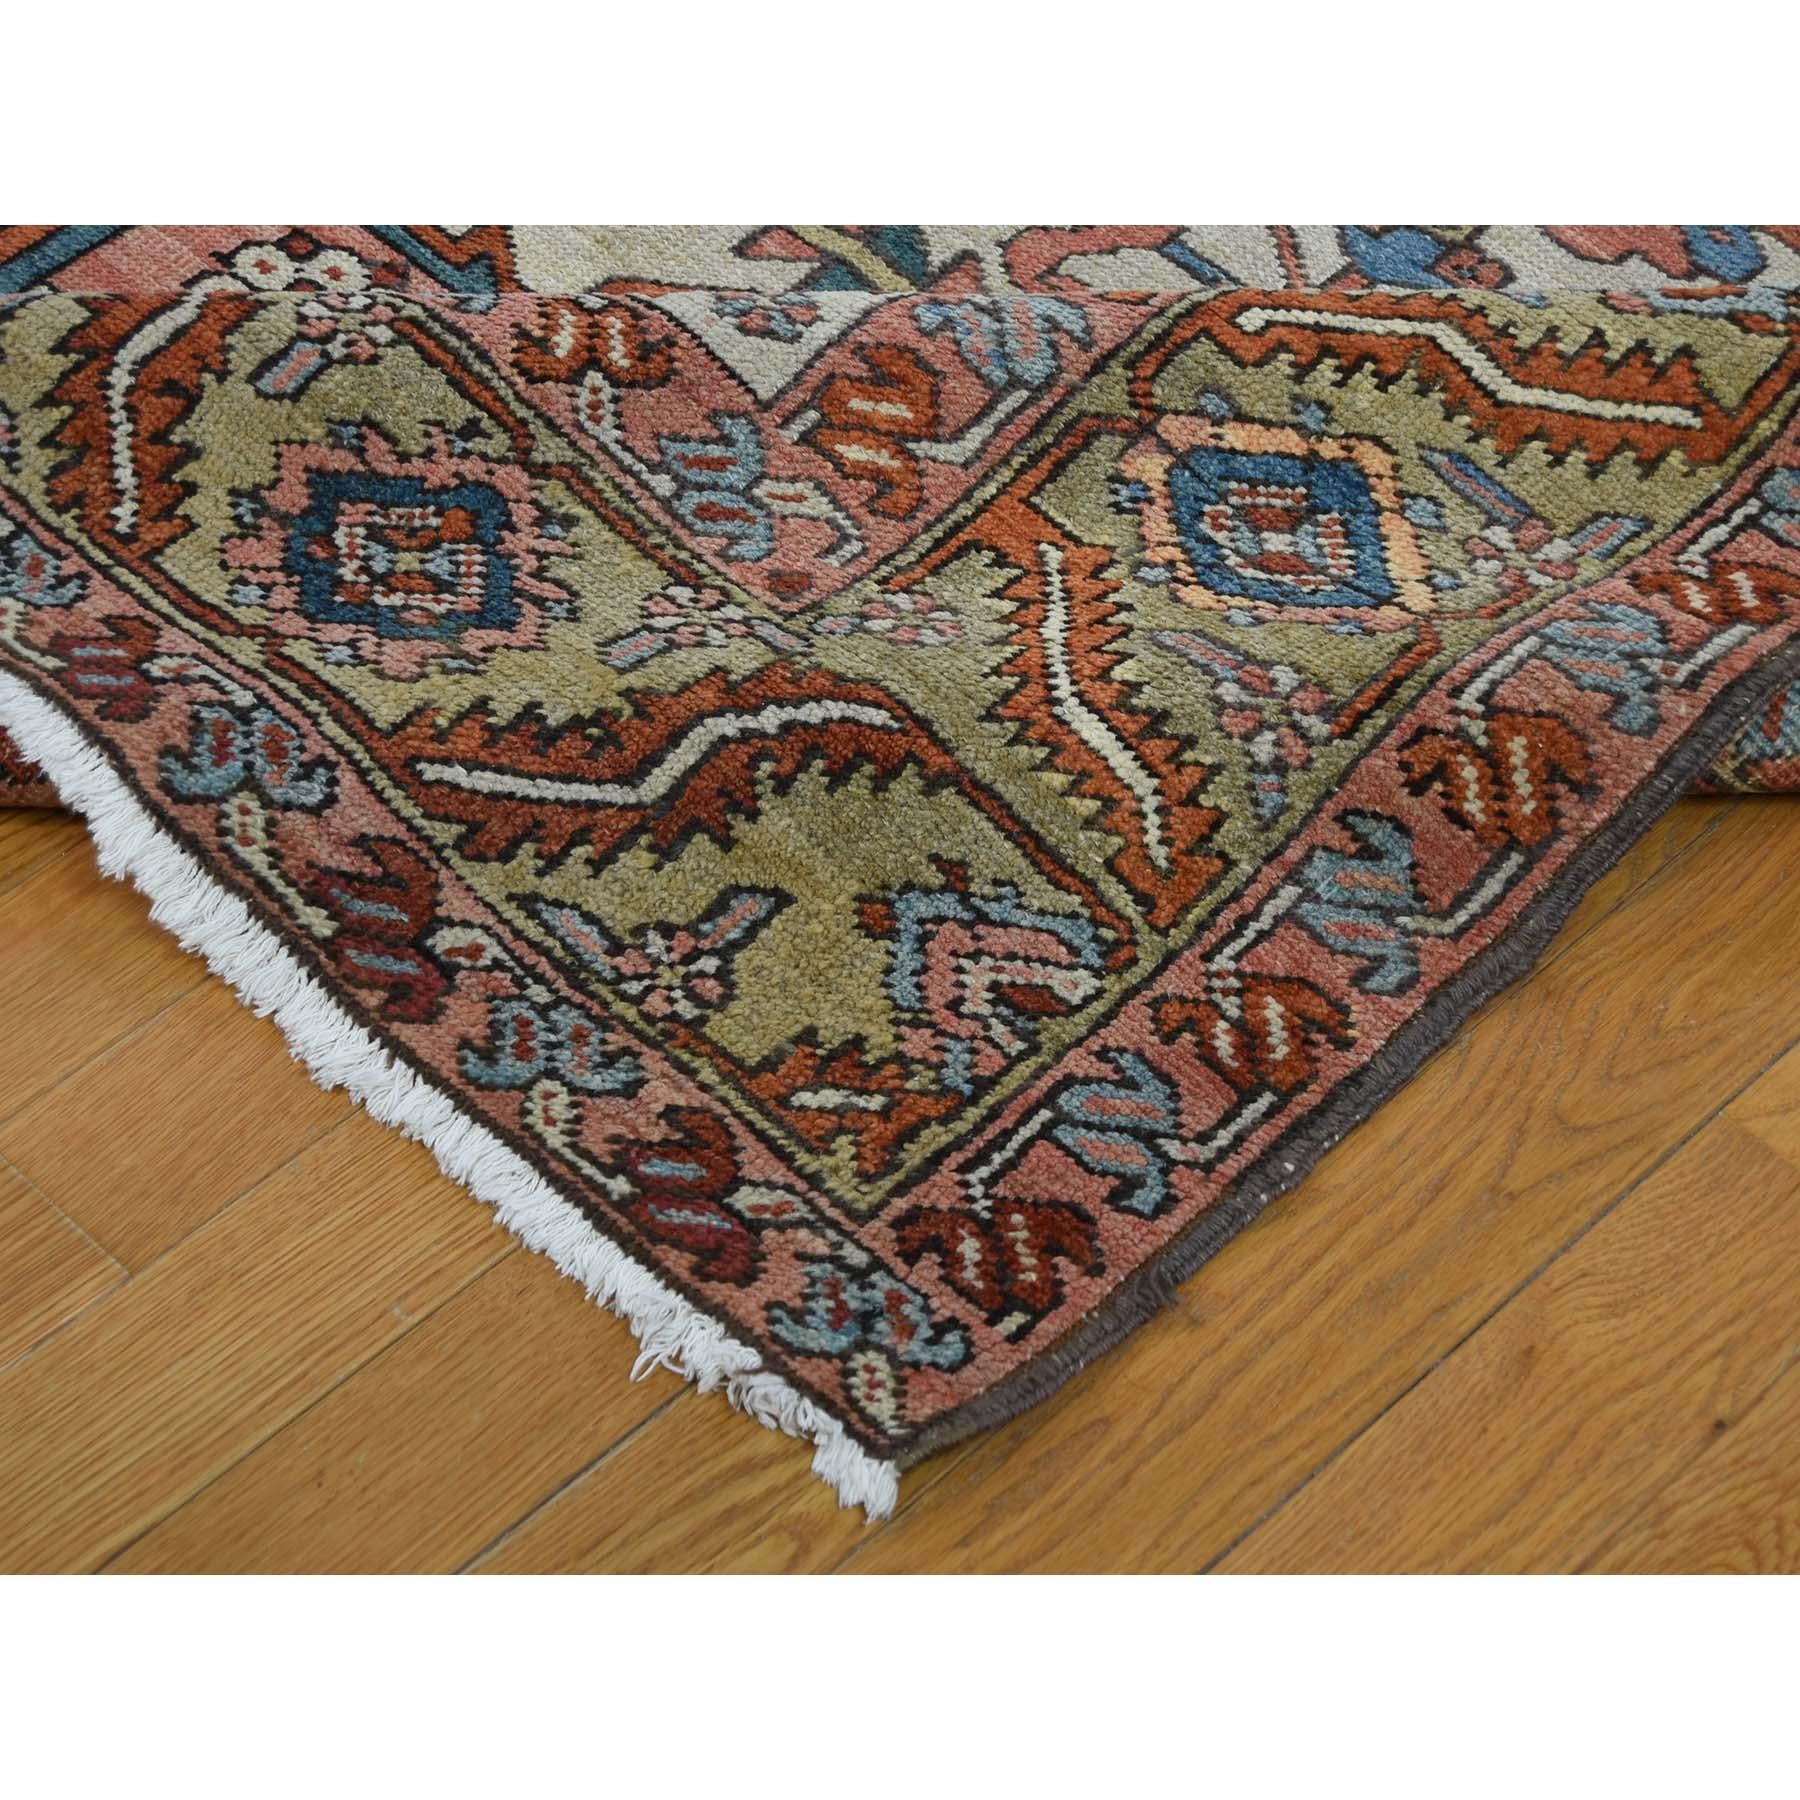 Wool Antique Persian Serapi Heriz Good Condition Hand Knotted Oversize Oriental Rug